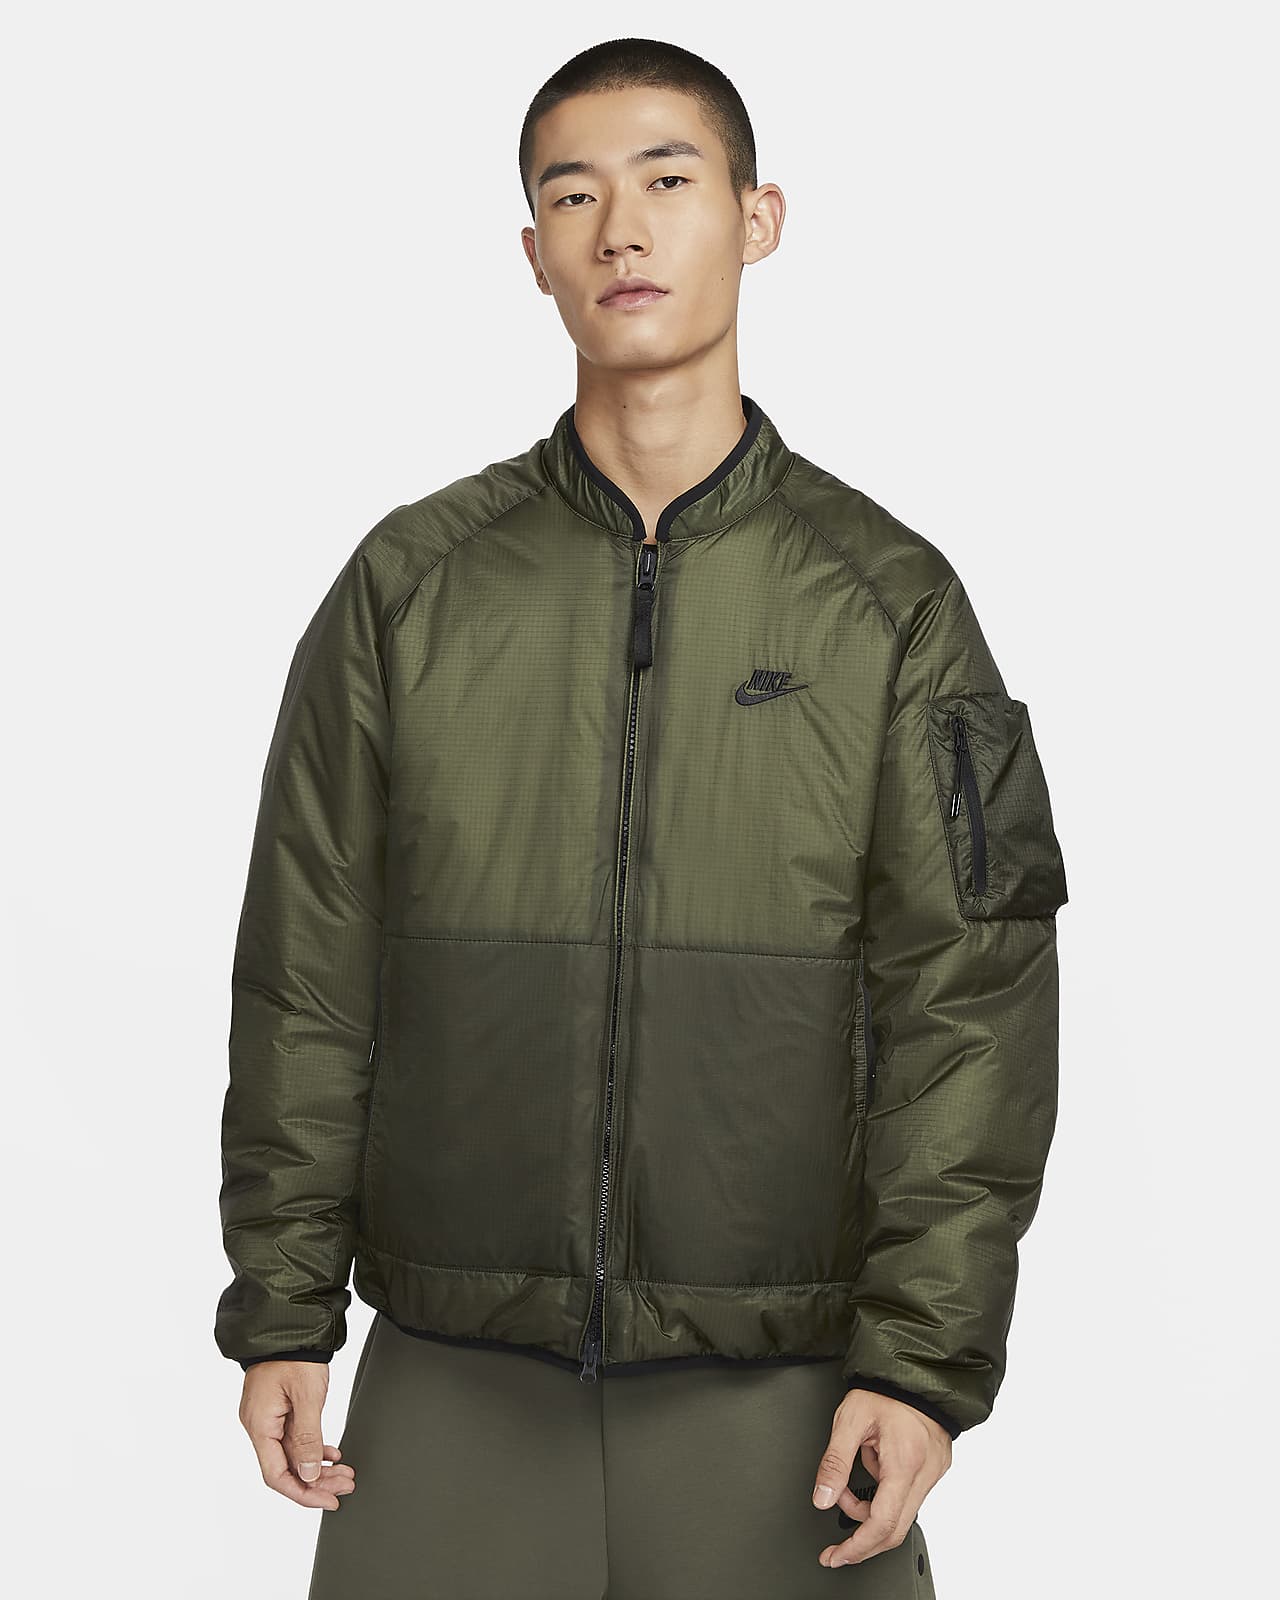 Nike Sportswear Tech Men's Therma-FIT Loose Insulated Jacket.